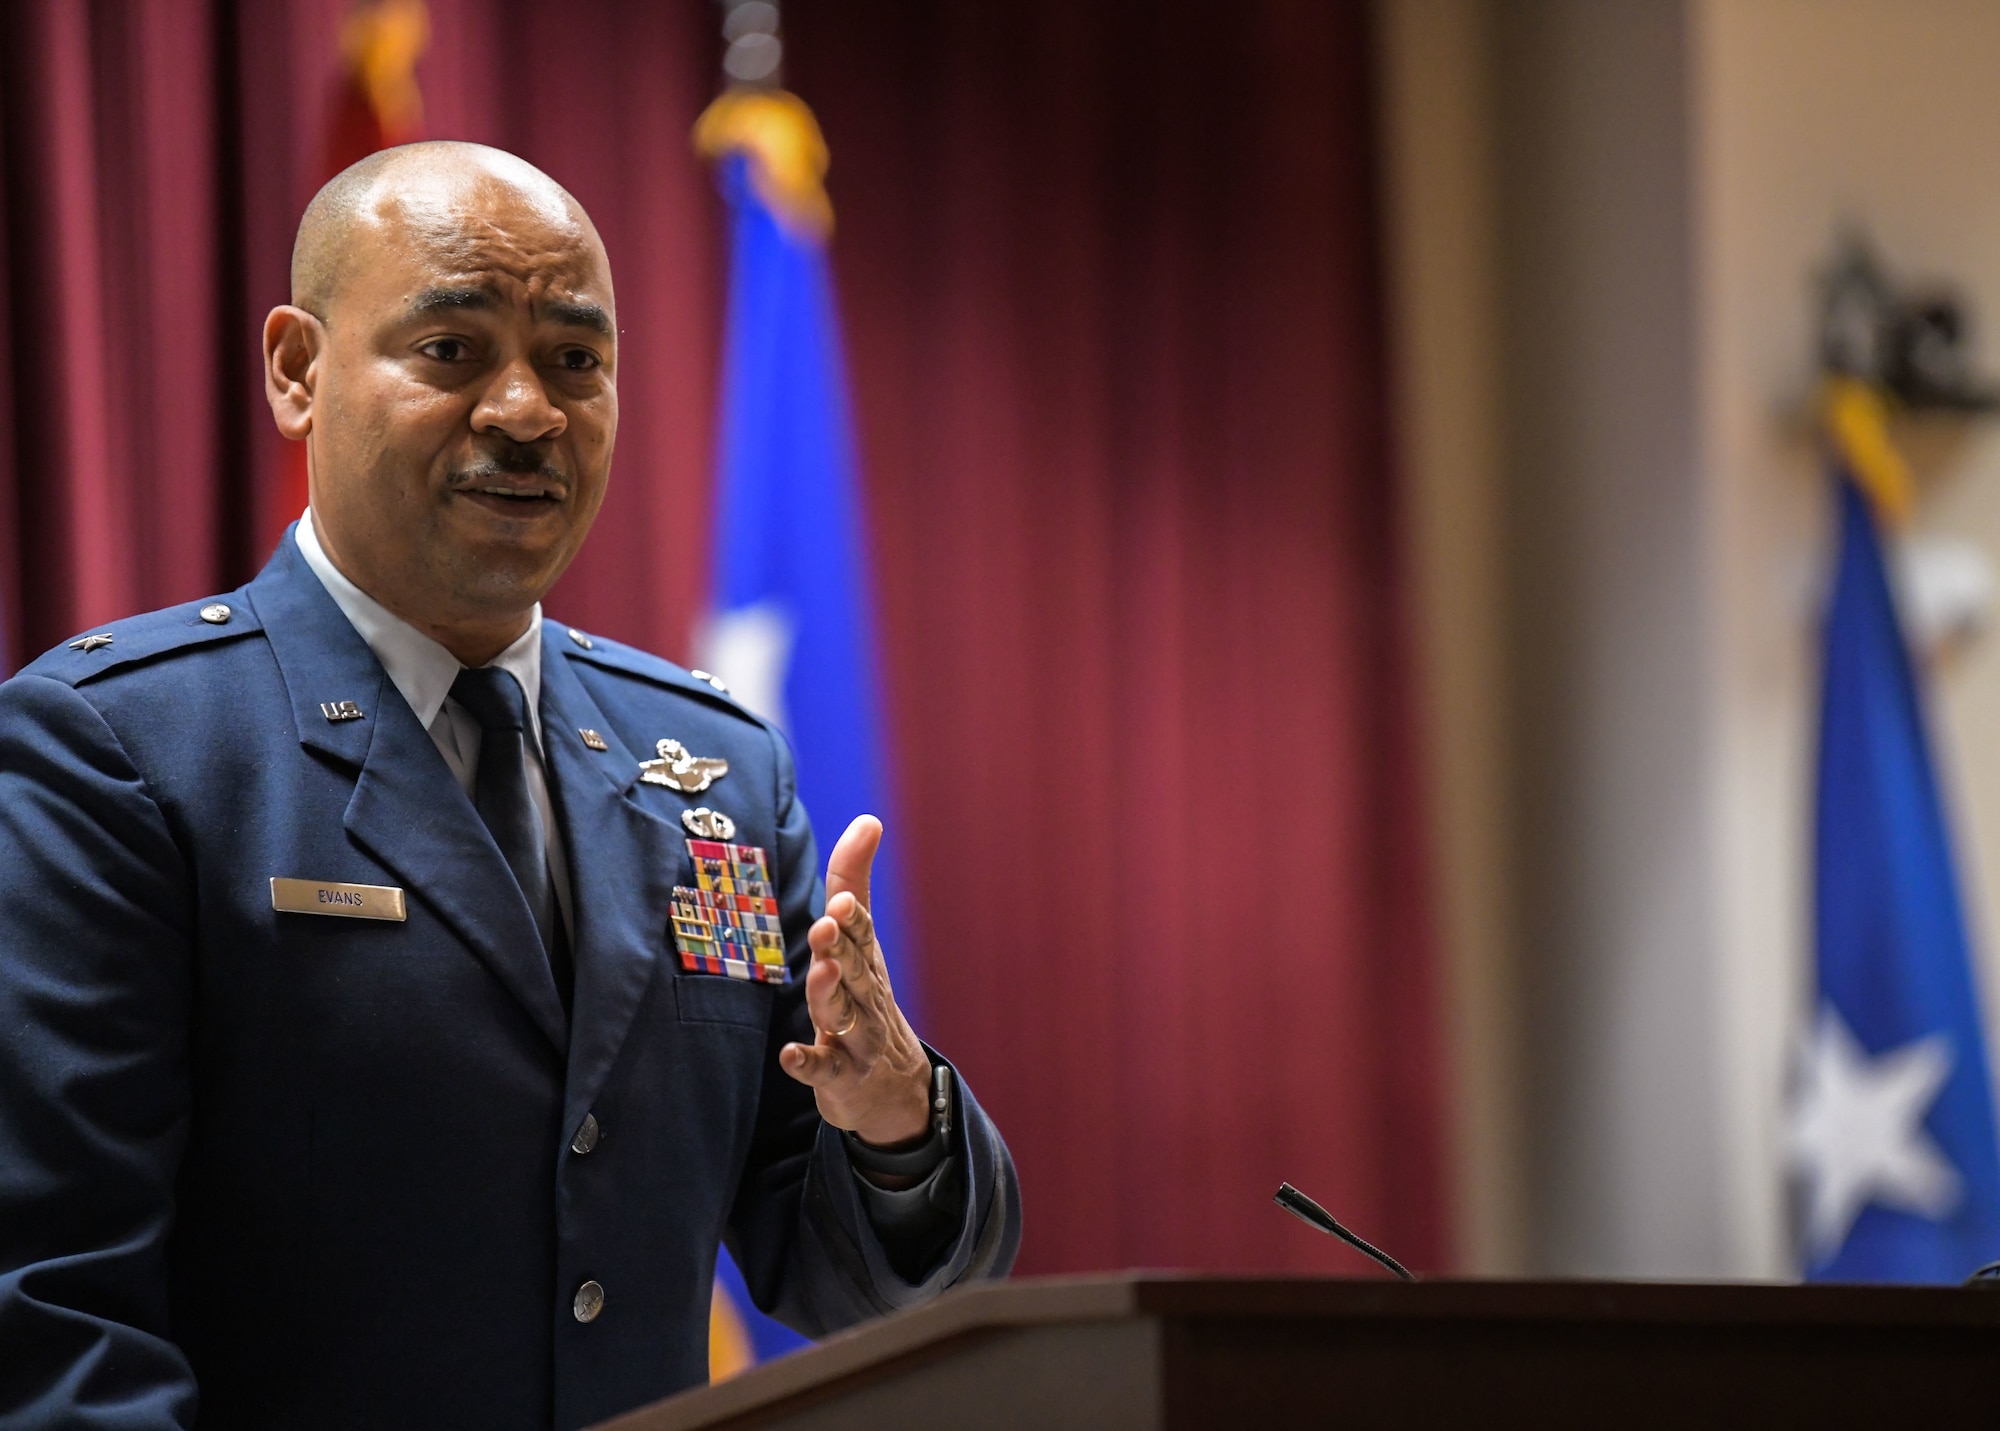 Brig. Gen. Edward H. Evans, Jr., chief of staff, Mississippi Air National Guard, and the first Mississippi Air National Guard member to be promoted to the rank of brigadier general, addresses the crowd during his promotion ceremony at Mississippi National Guard Joint Force Headquarters, Jackson, Mississippi, March 5, 2022.